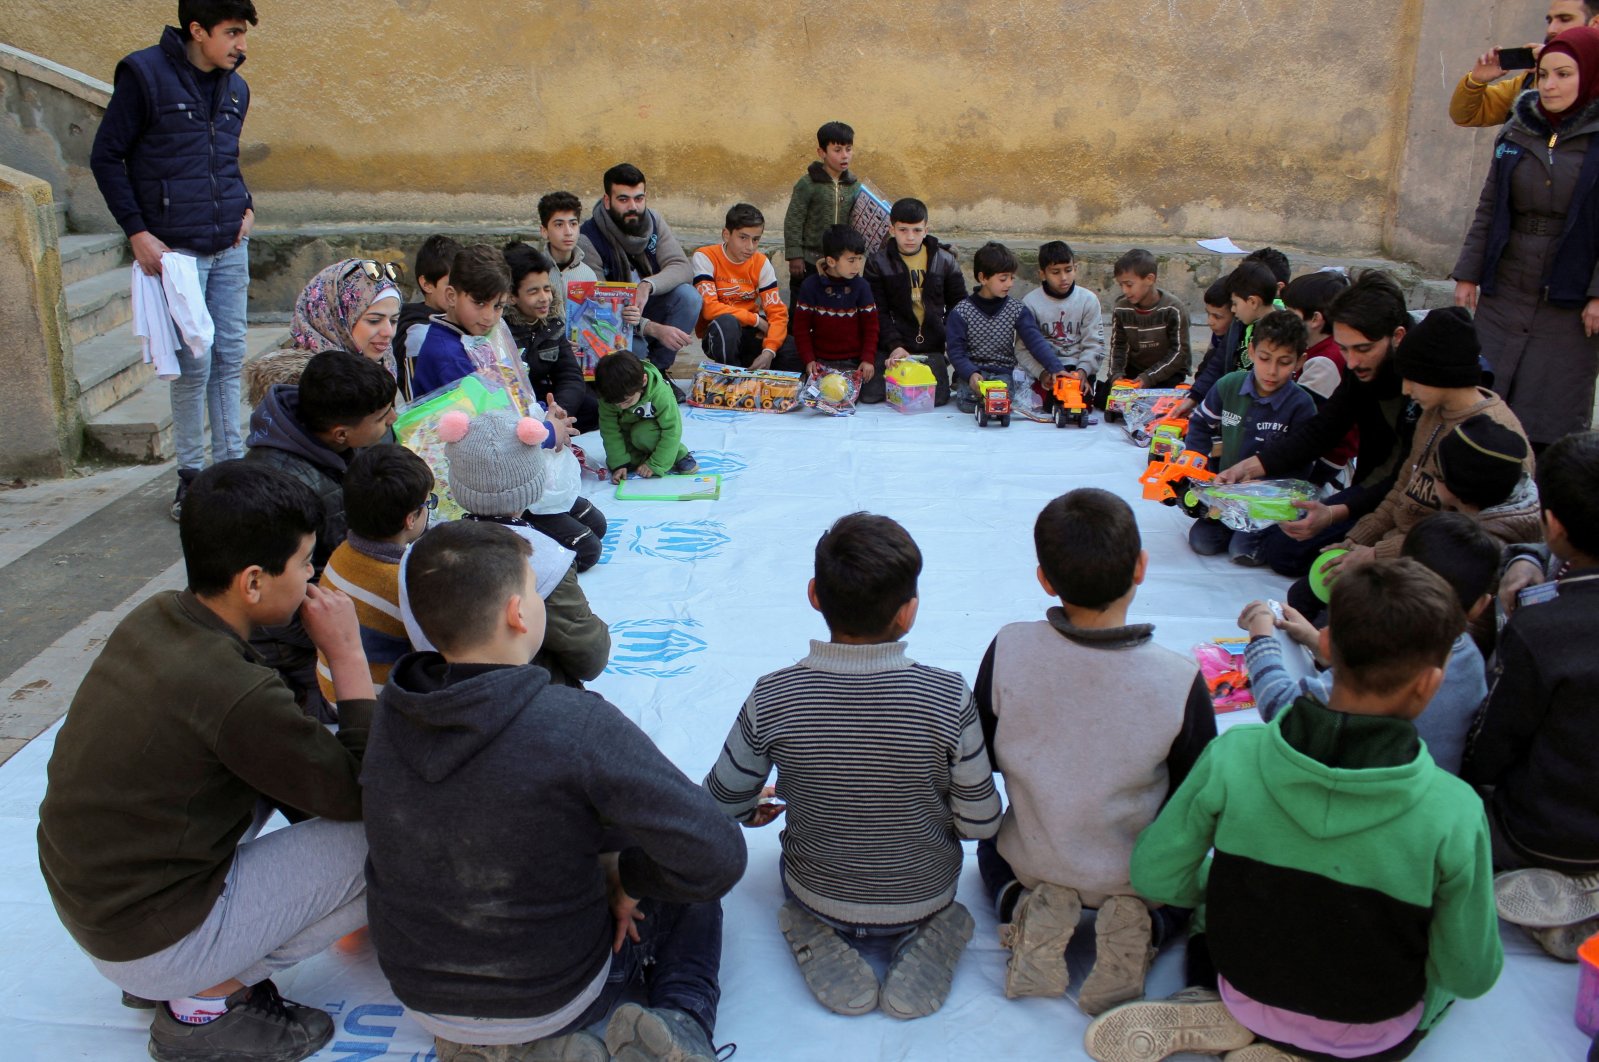 UNICEF volunteers play with children at a makeshift shelter in a school run by UNICEF where psychological first aid is provided, in the aftermath of a deadly earthquake in Aleppo, Syria Feb. 13, 2023. (Reuters File Photo)